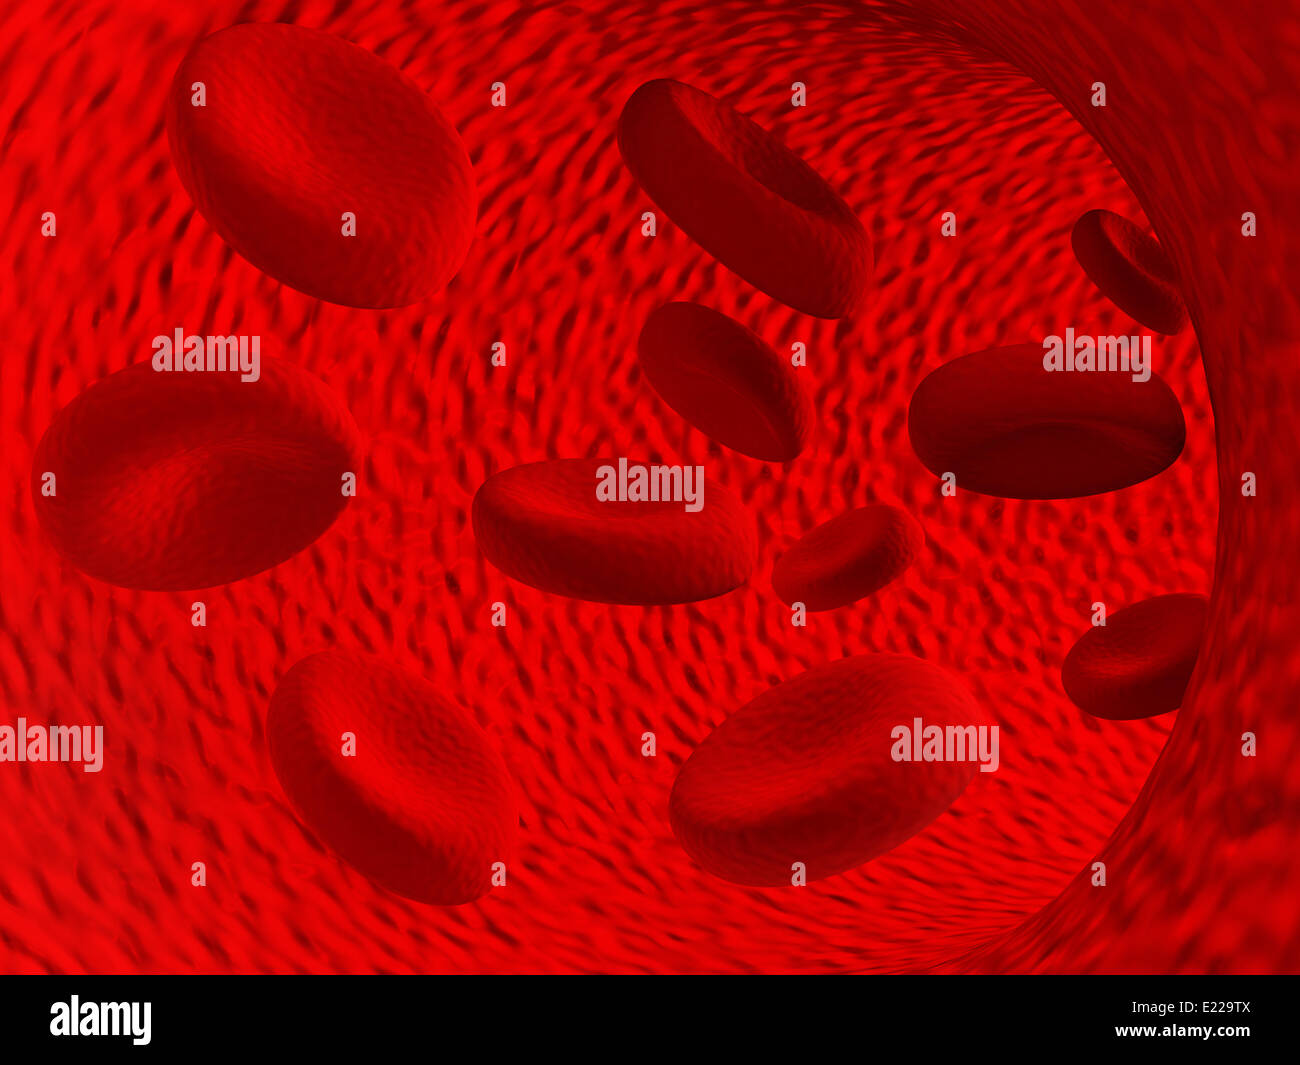 illustration of blood particles in focus Stock Photo